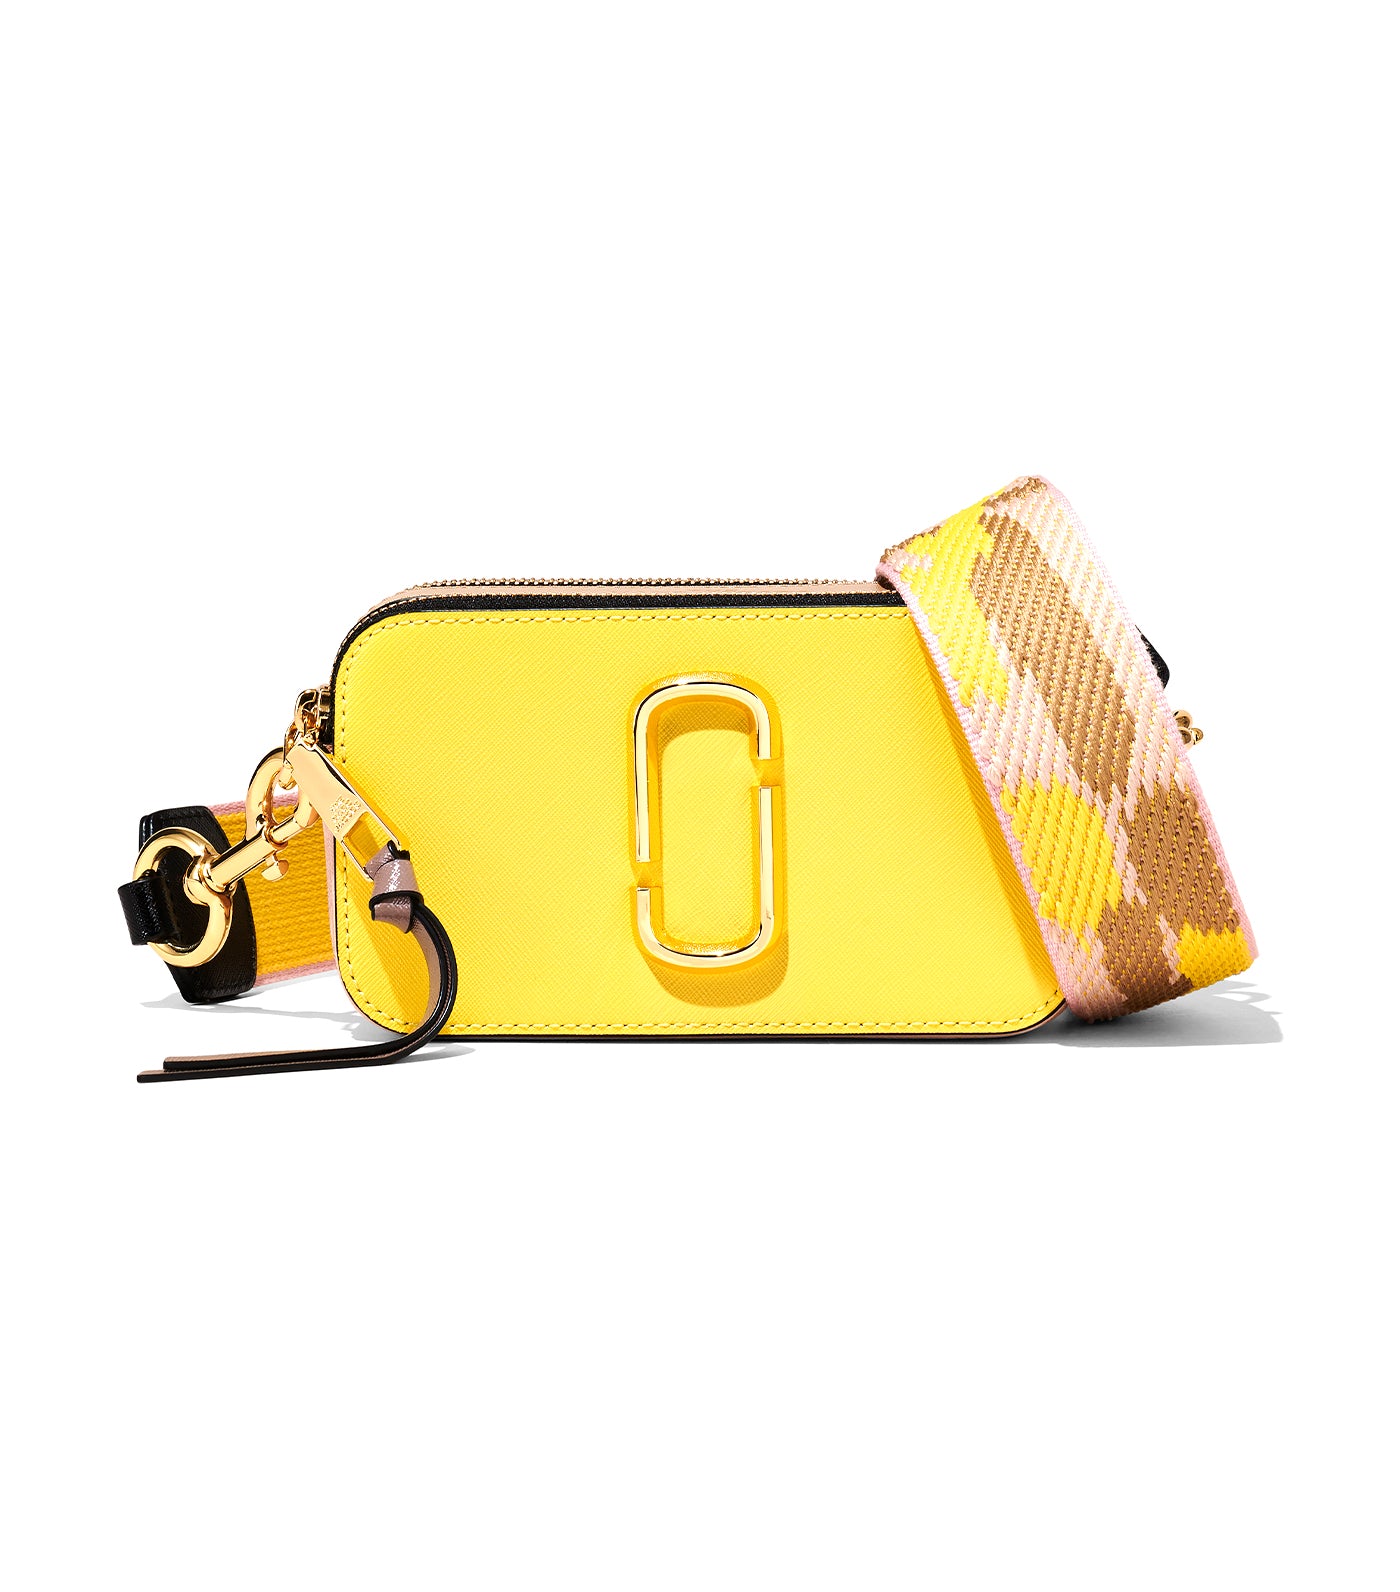 Marc by Marc Jacobs yellow bag | eBay